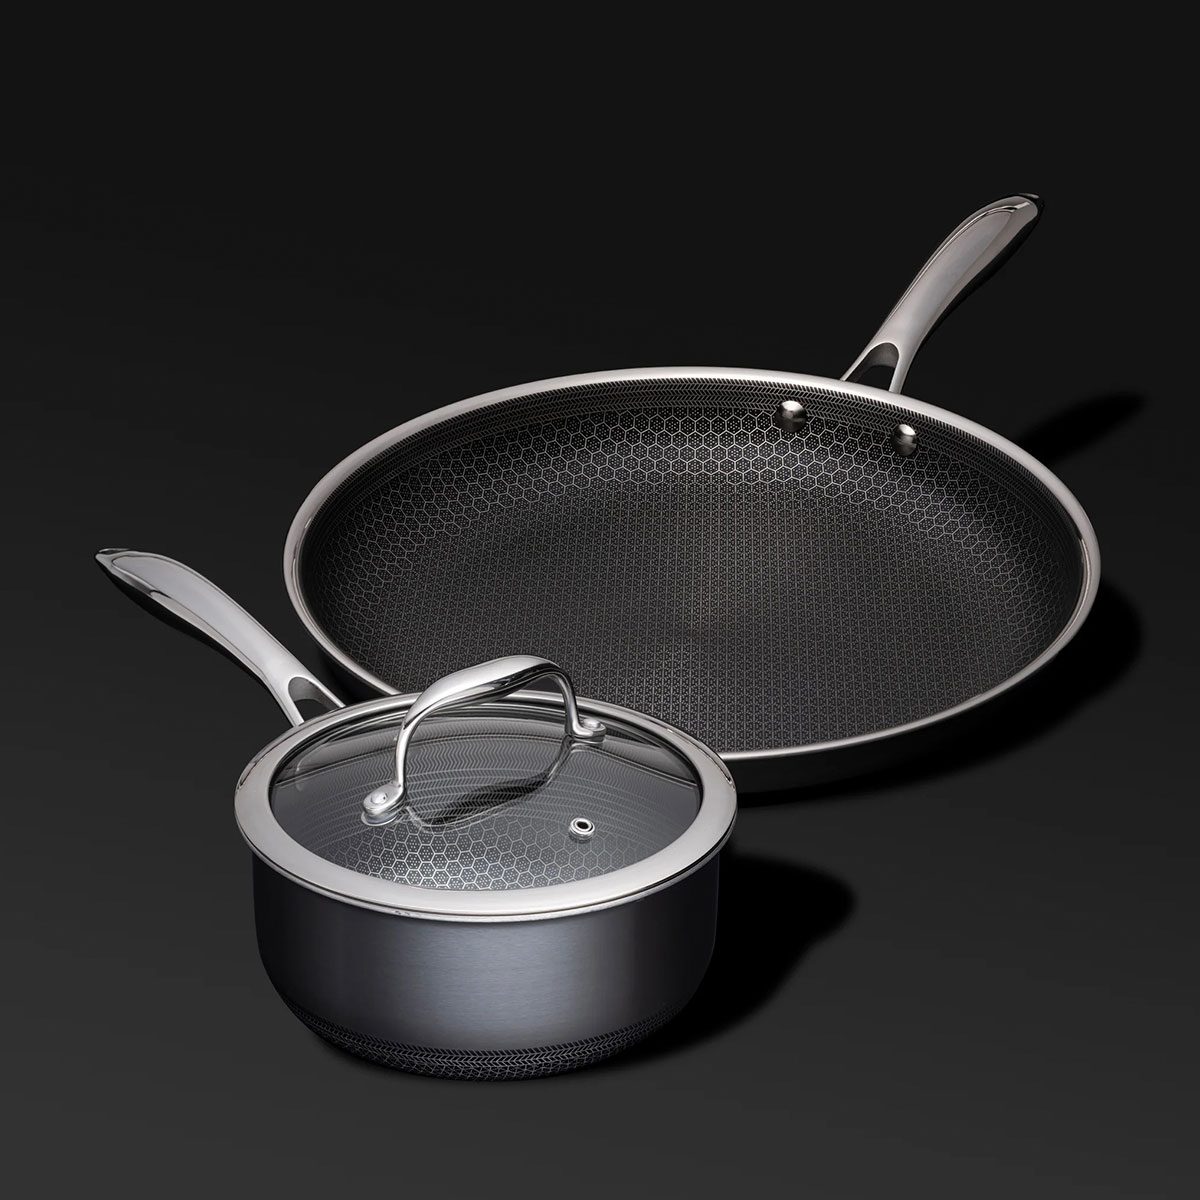 Costco Item Review Hexclad Hex Clad Hybrid Cookware Commercial Pan and Lid  Set 8 10 12 inch Wok 